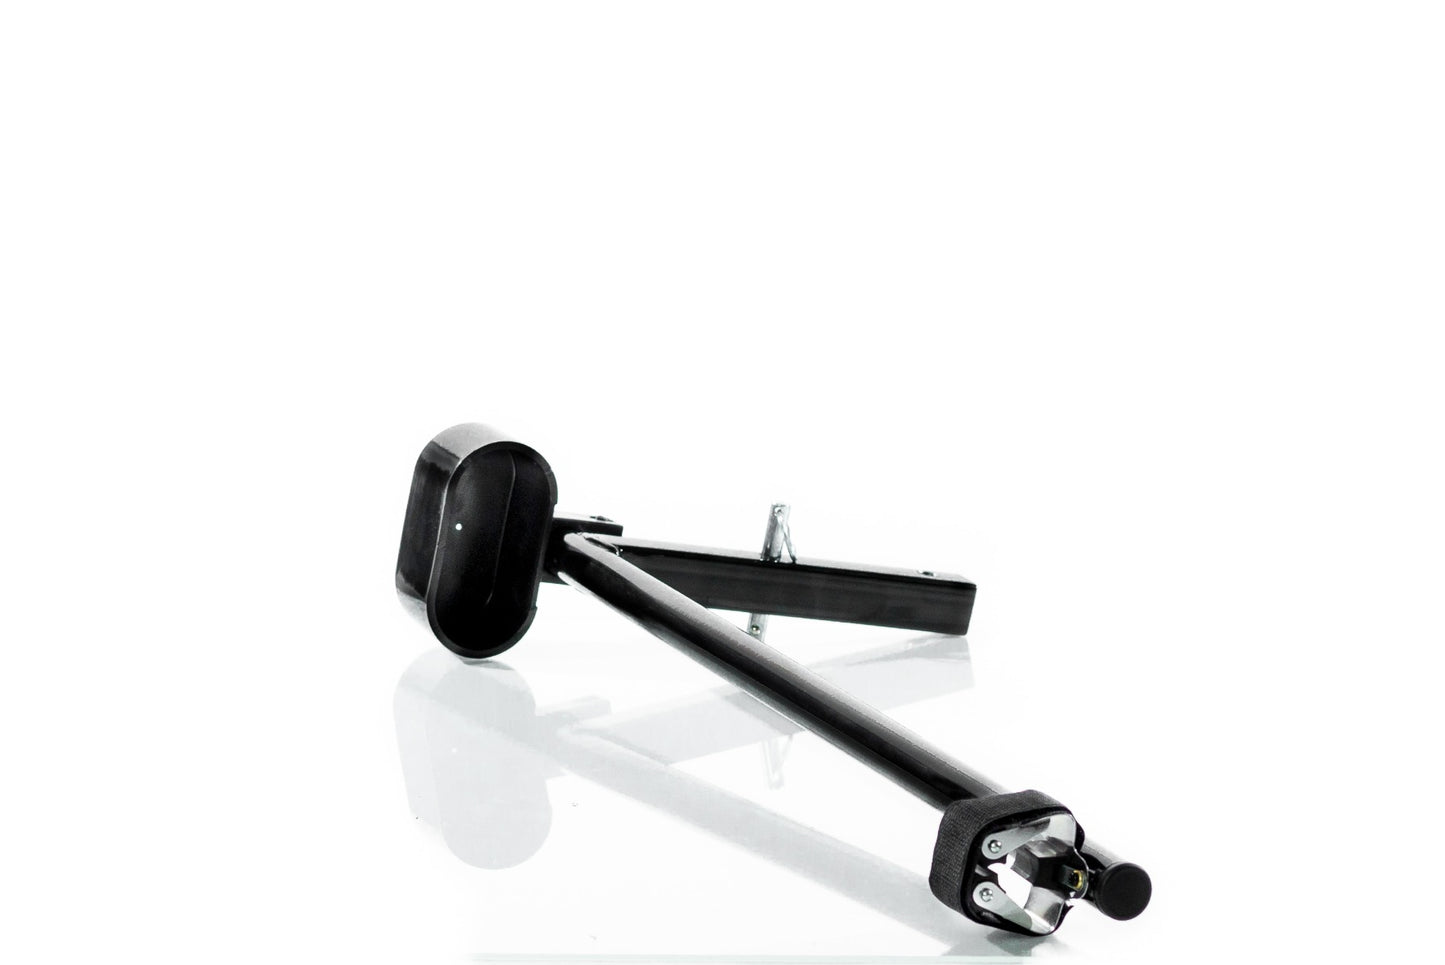 Crutch Holder For Mobility Scooters